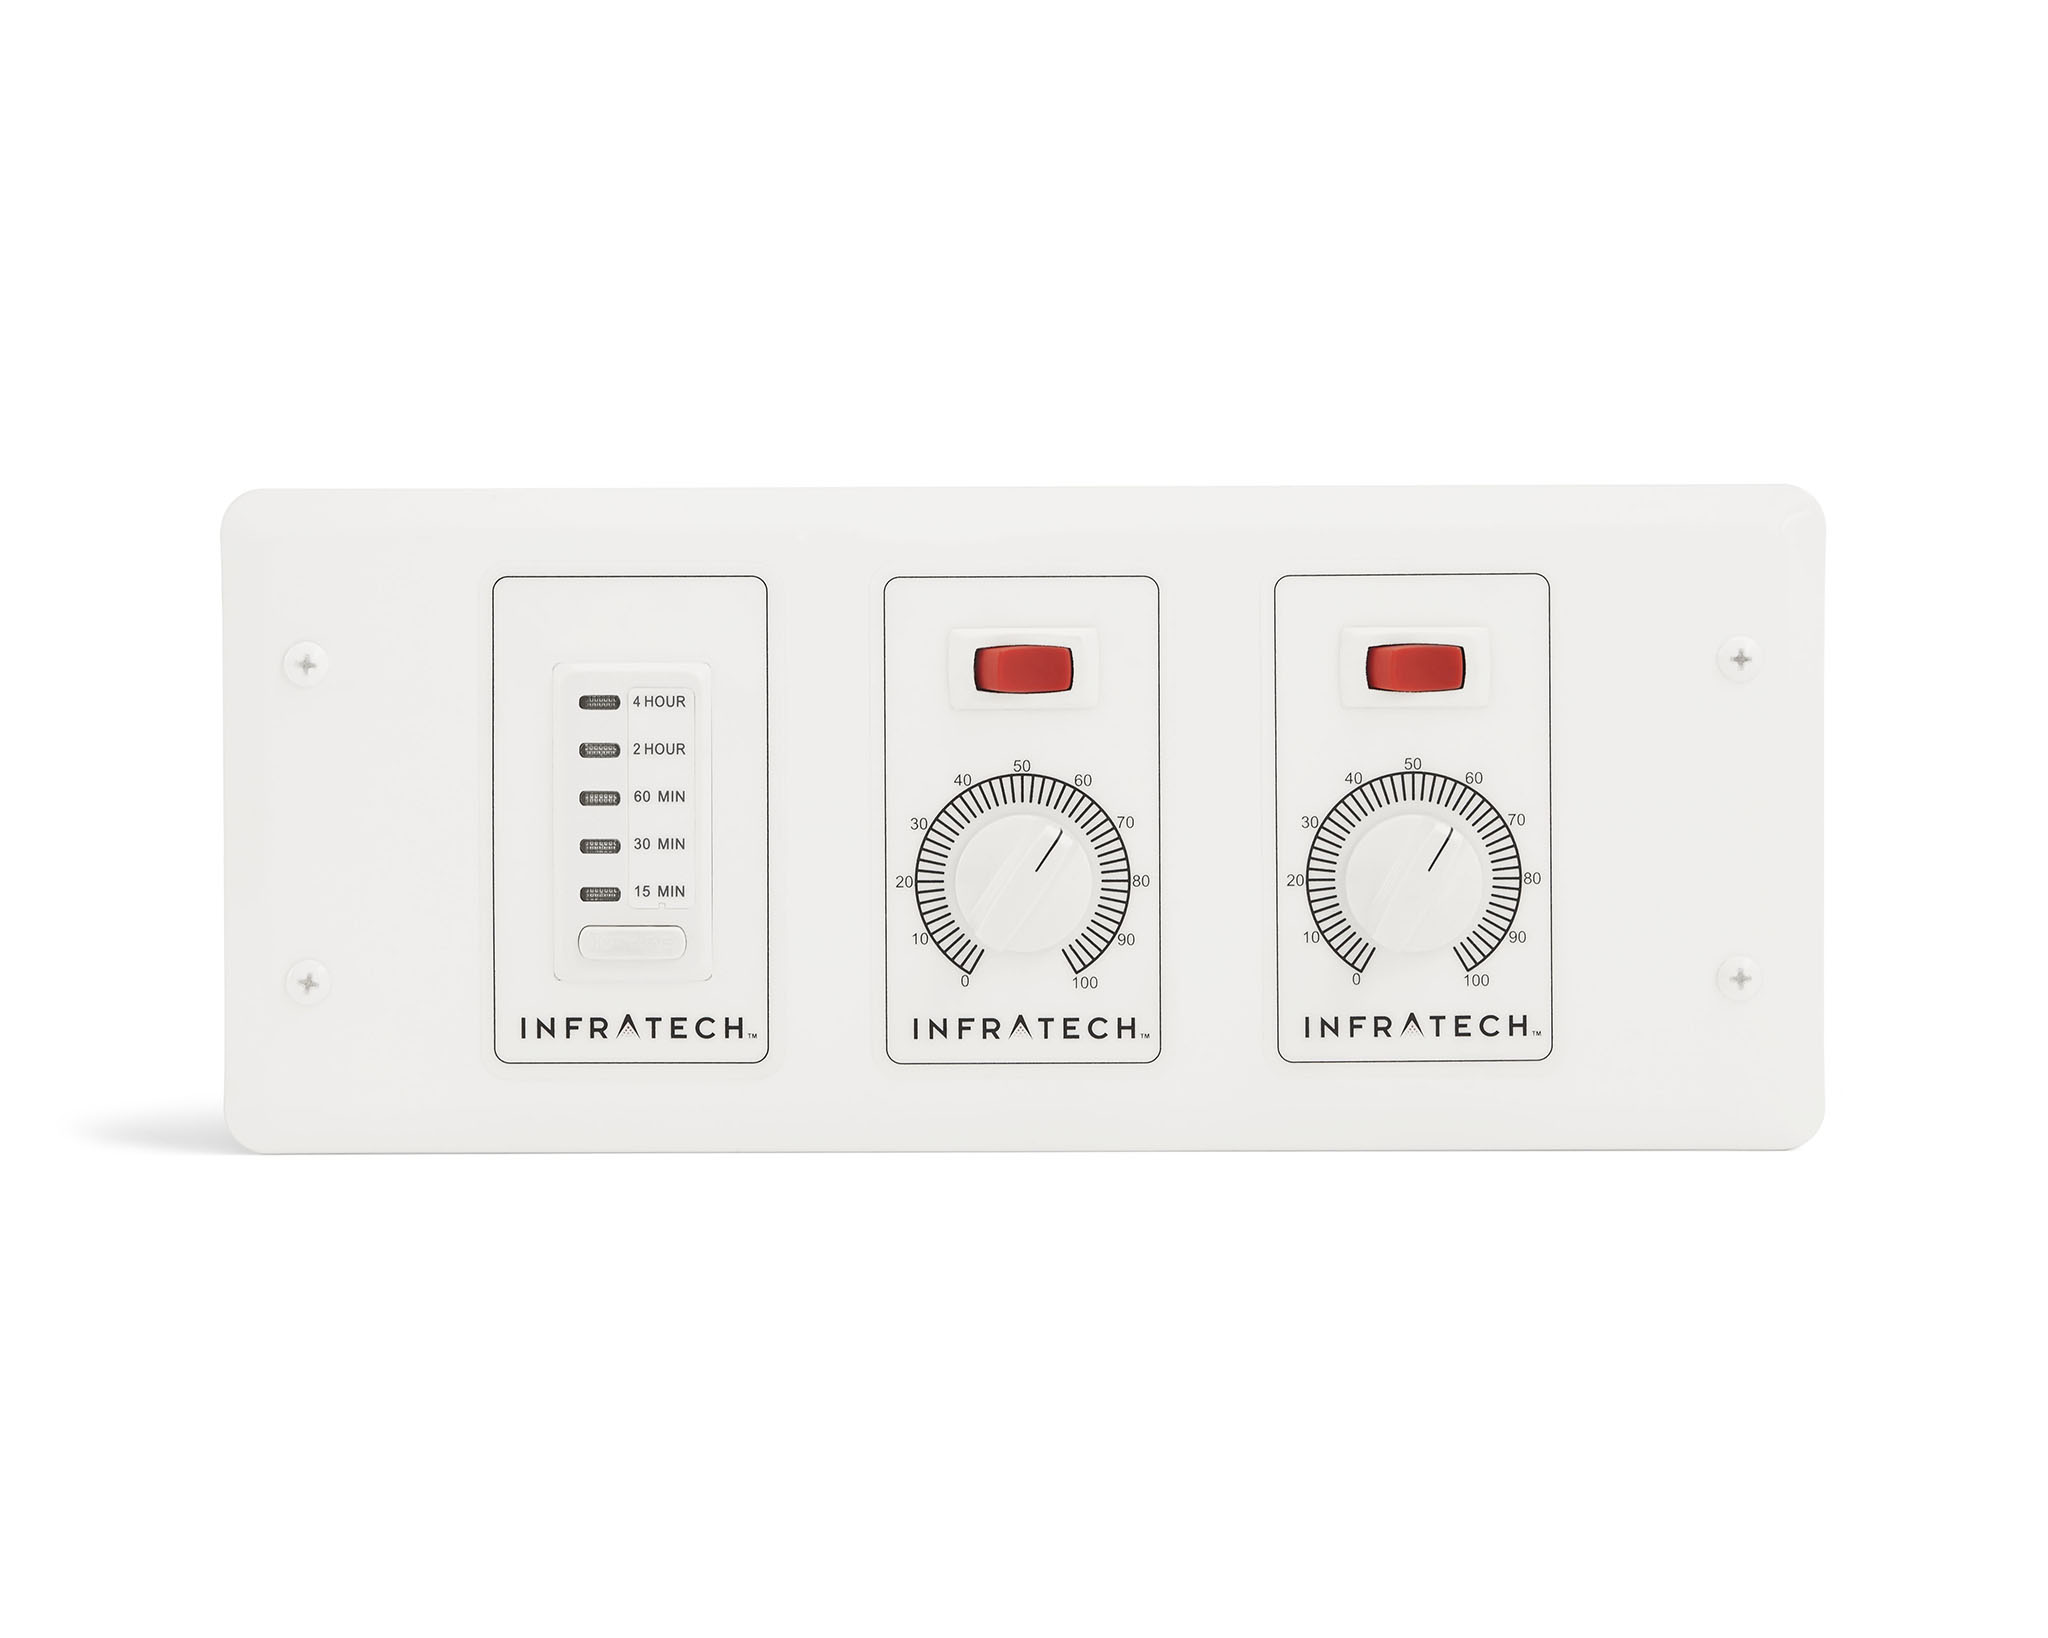 All Zone Analog Controllers also available in white.